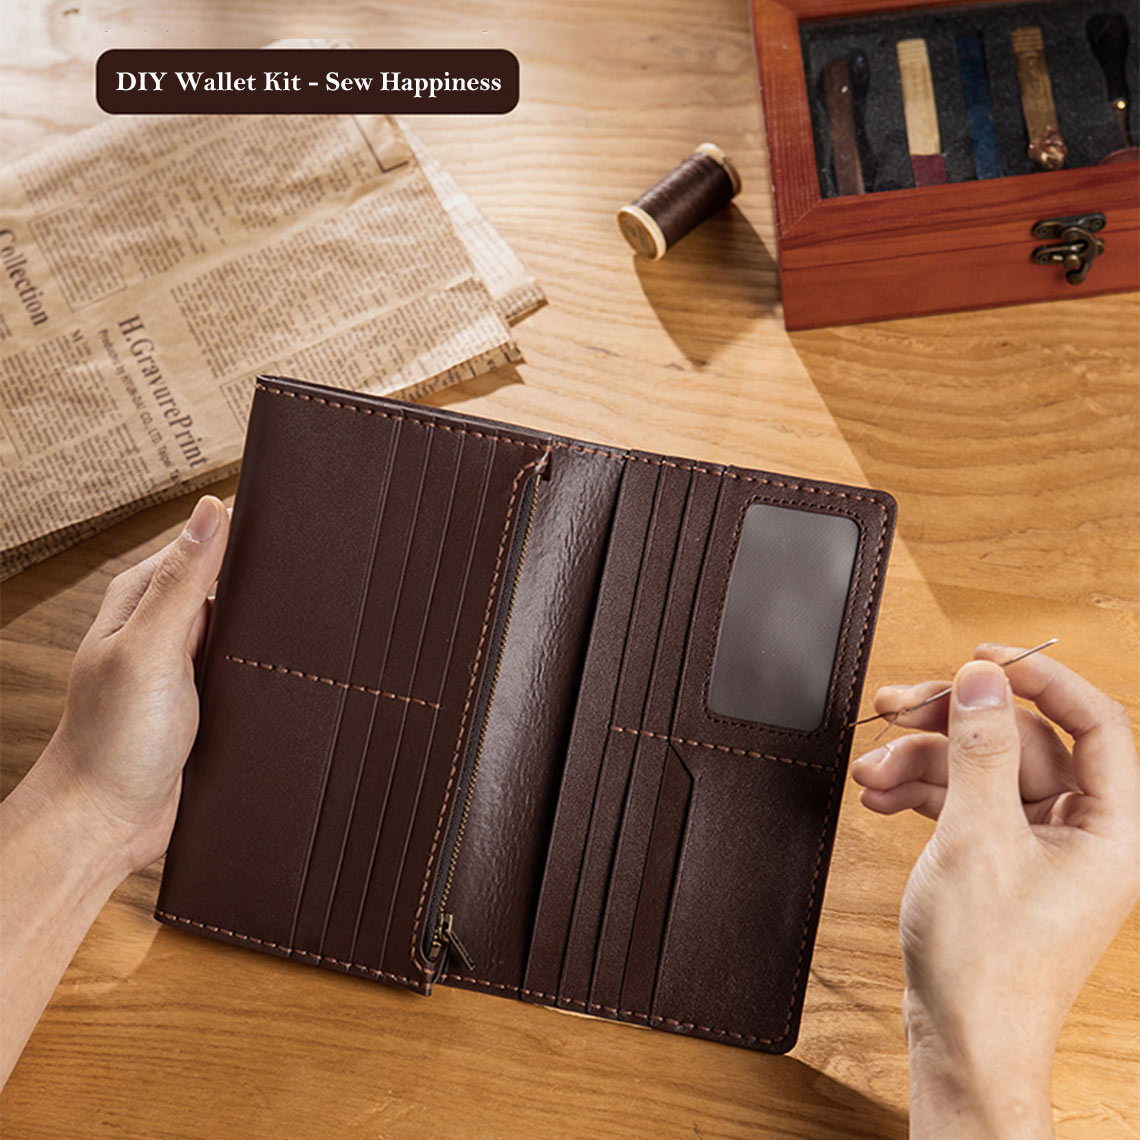 Handmade genuine leather long wallet kit | Long wallet with ID window, phone case